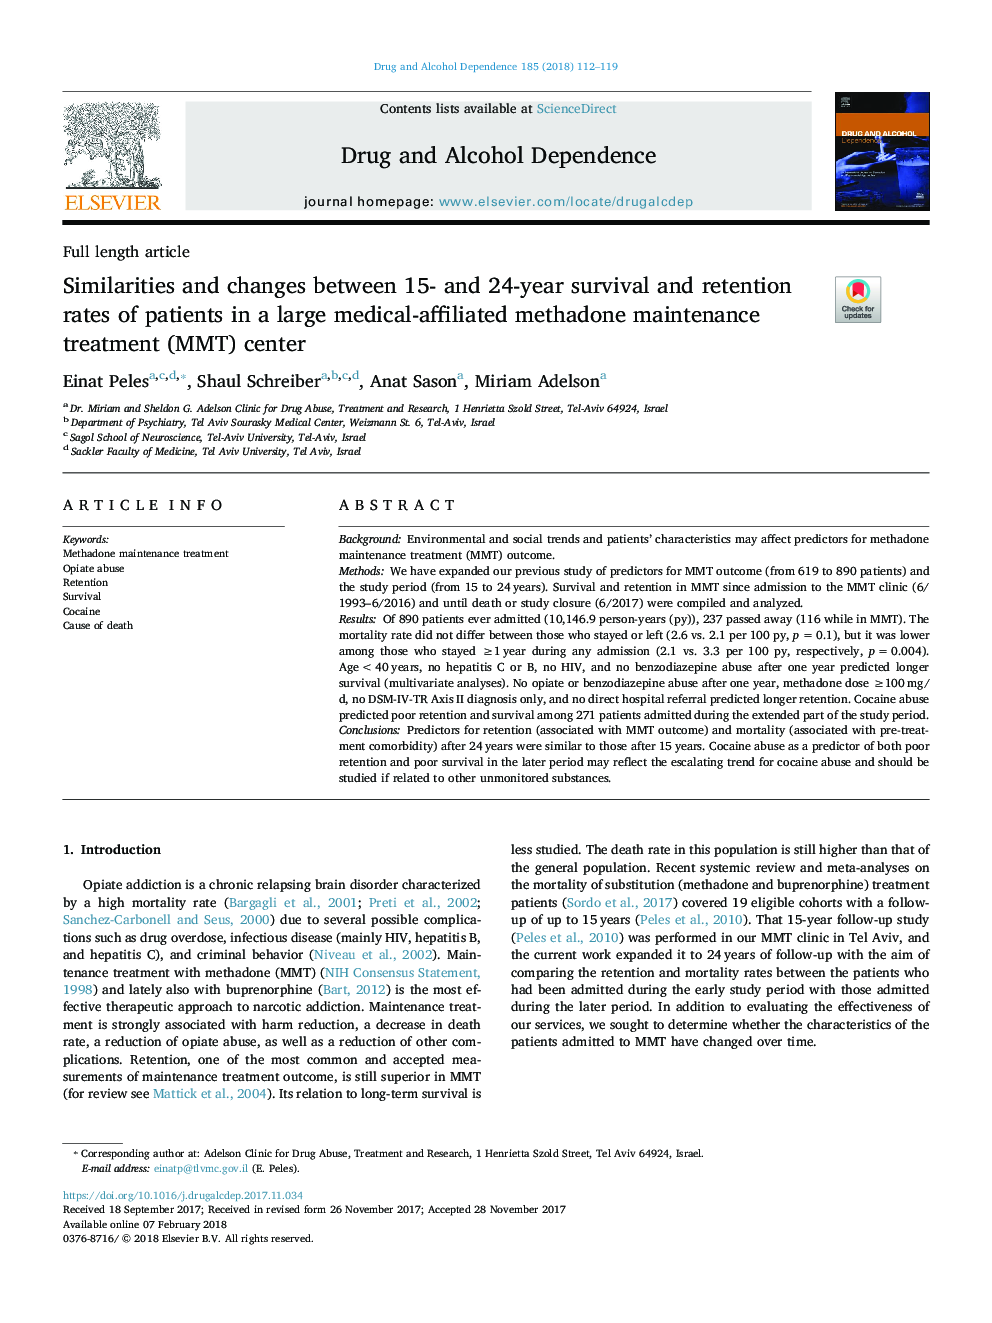 Similarities and changes between 15- and 24-year survival and retention rates of patients in a large medical-affiliated methadone maintenance treatment (MMT) center